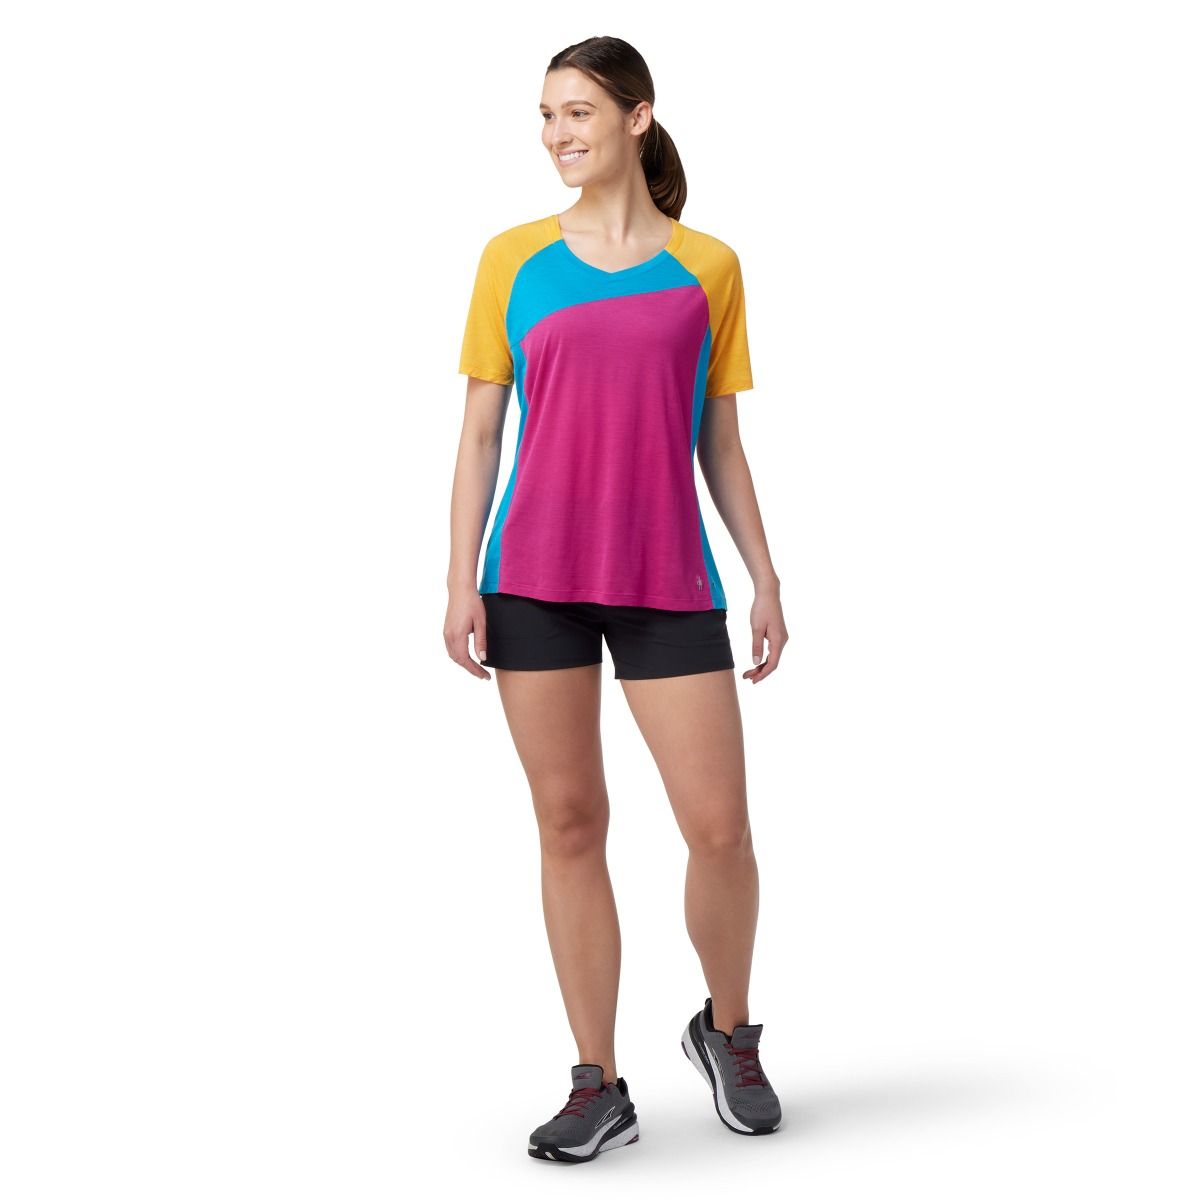 Stay Cool with Outdoor Sports Short Sleeve Smock Yoga Shirt for